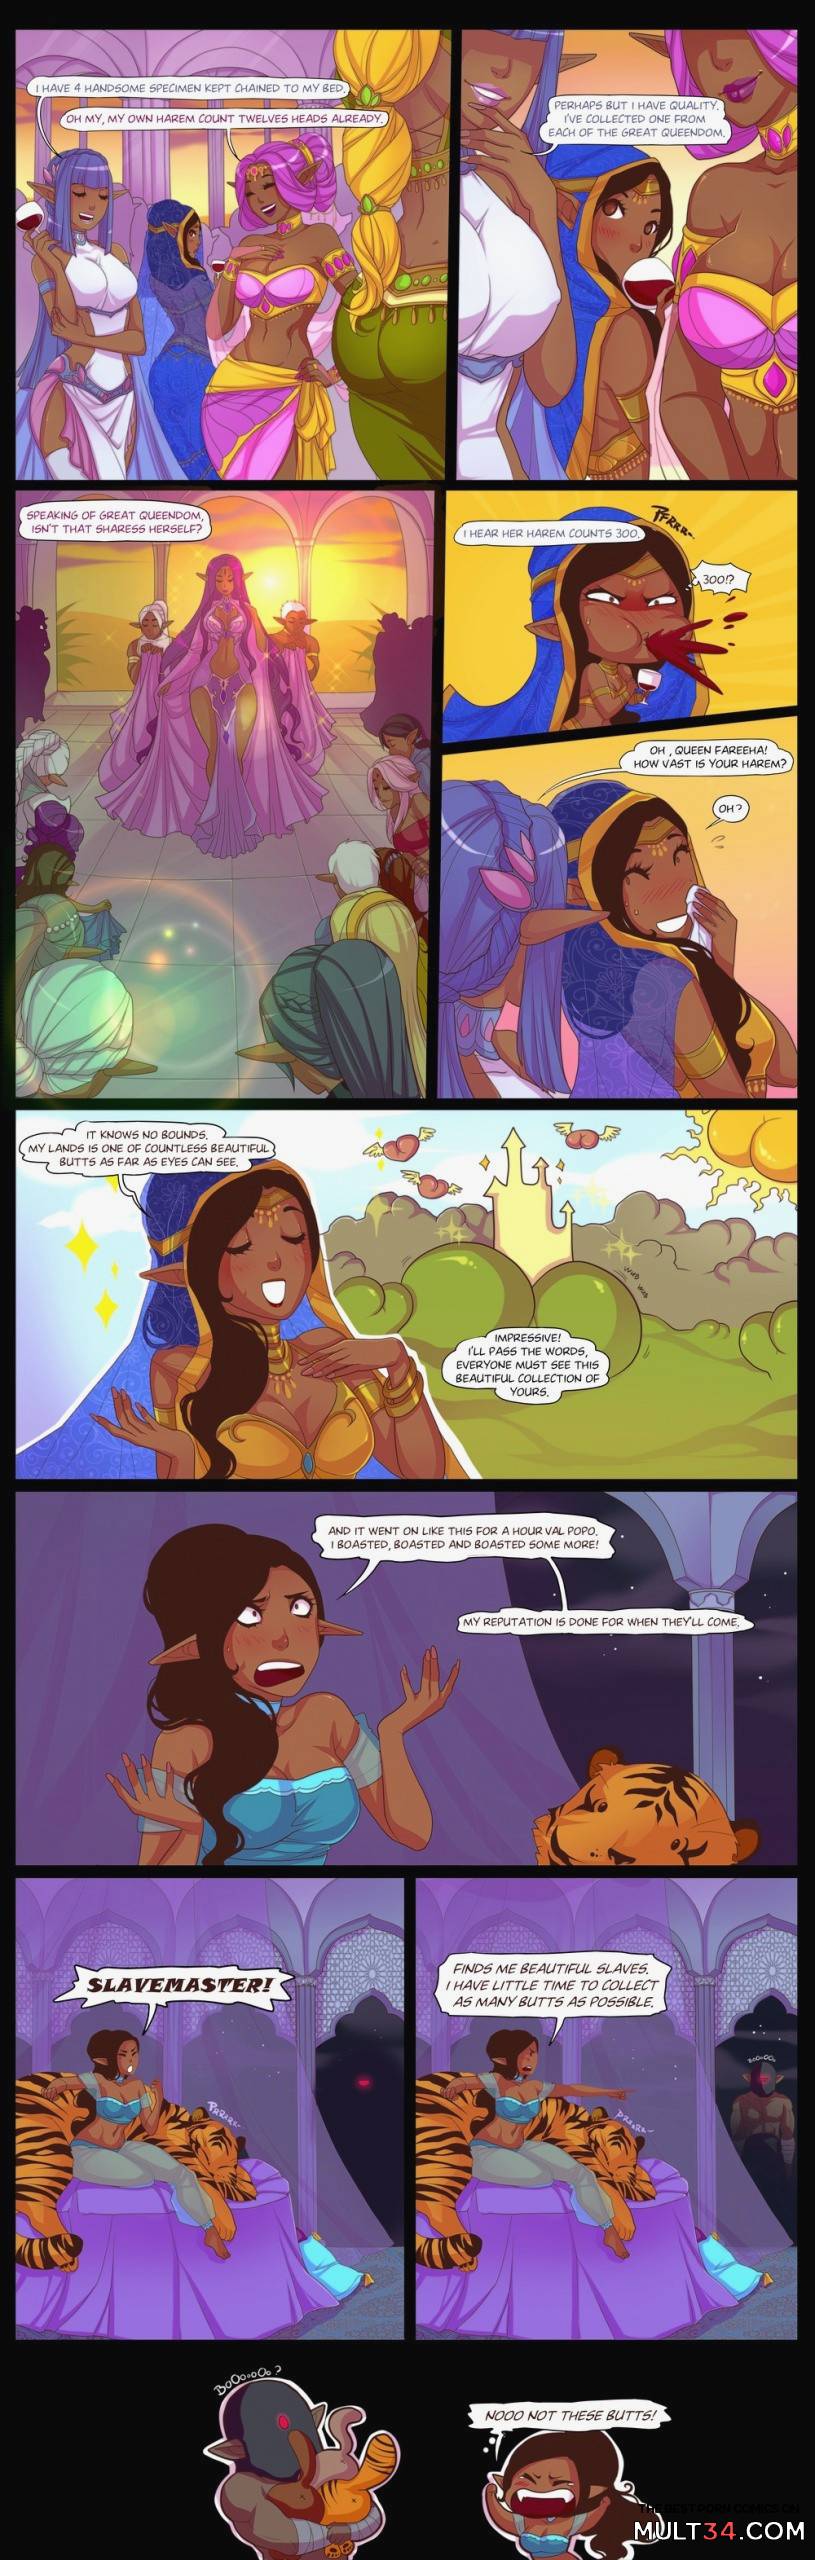 Queen of Butts page 1